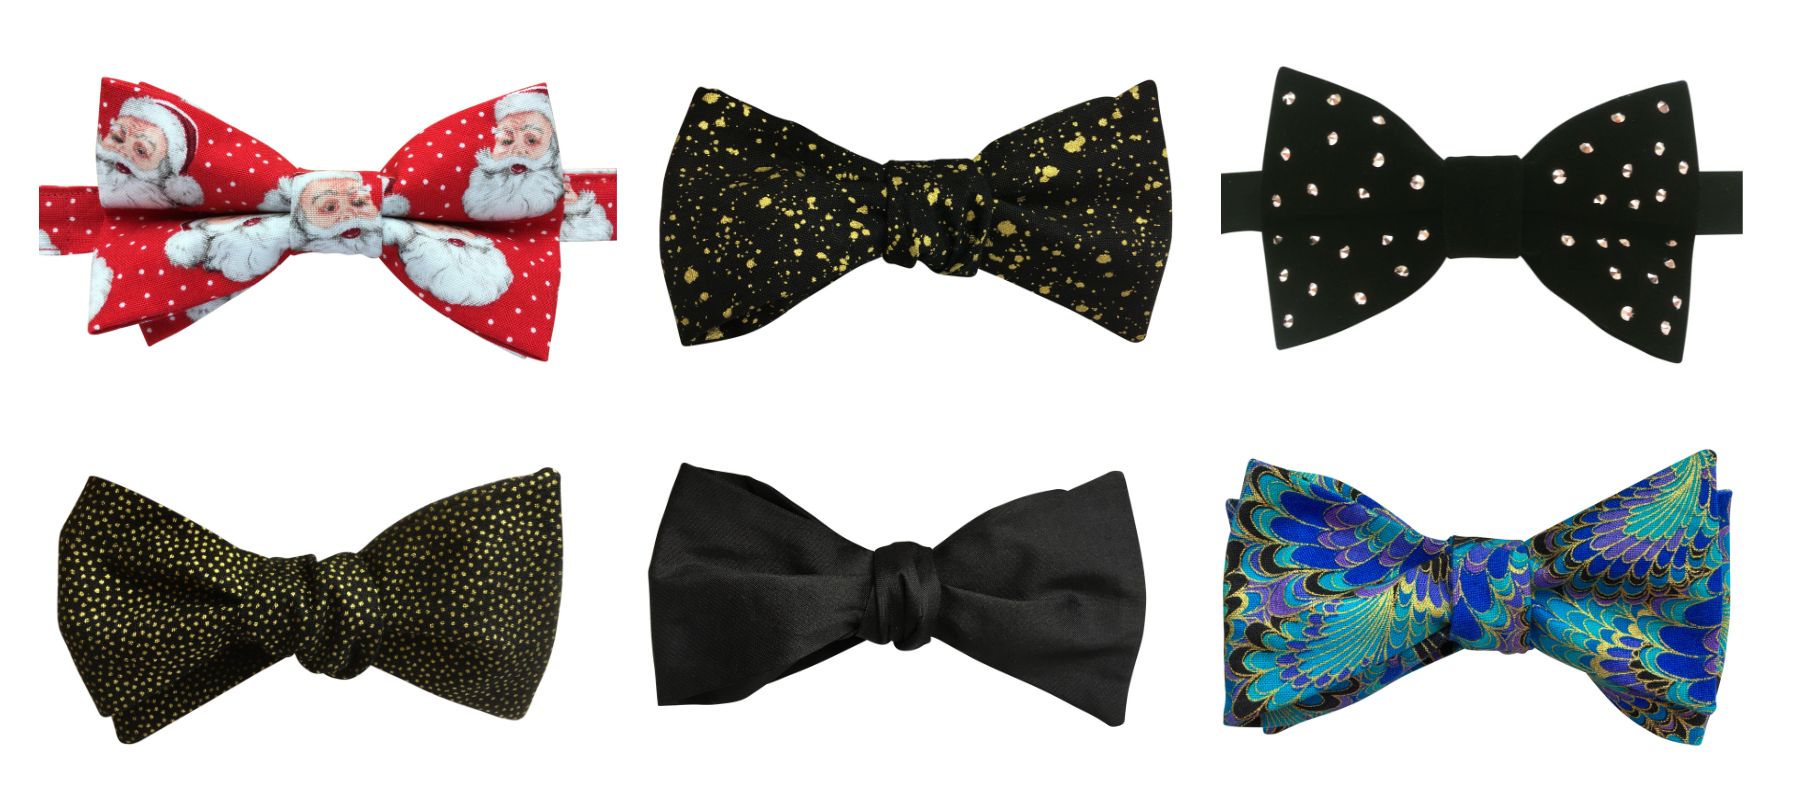 Most Popular Bow Ties, 2016-2022